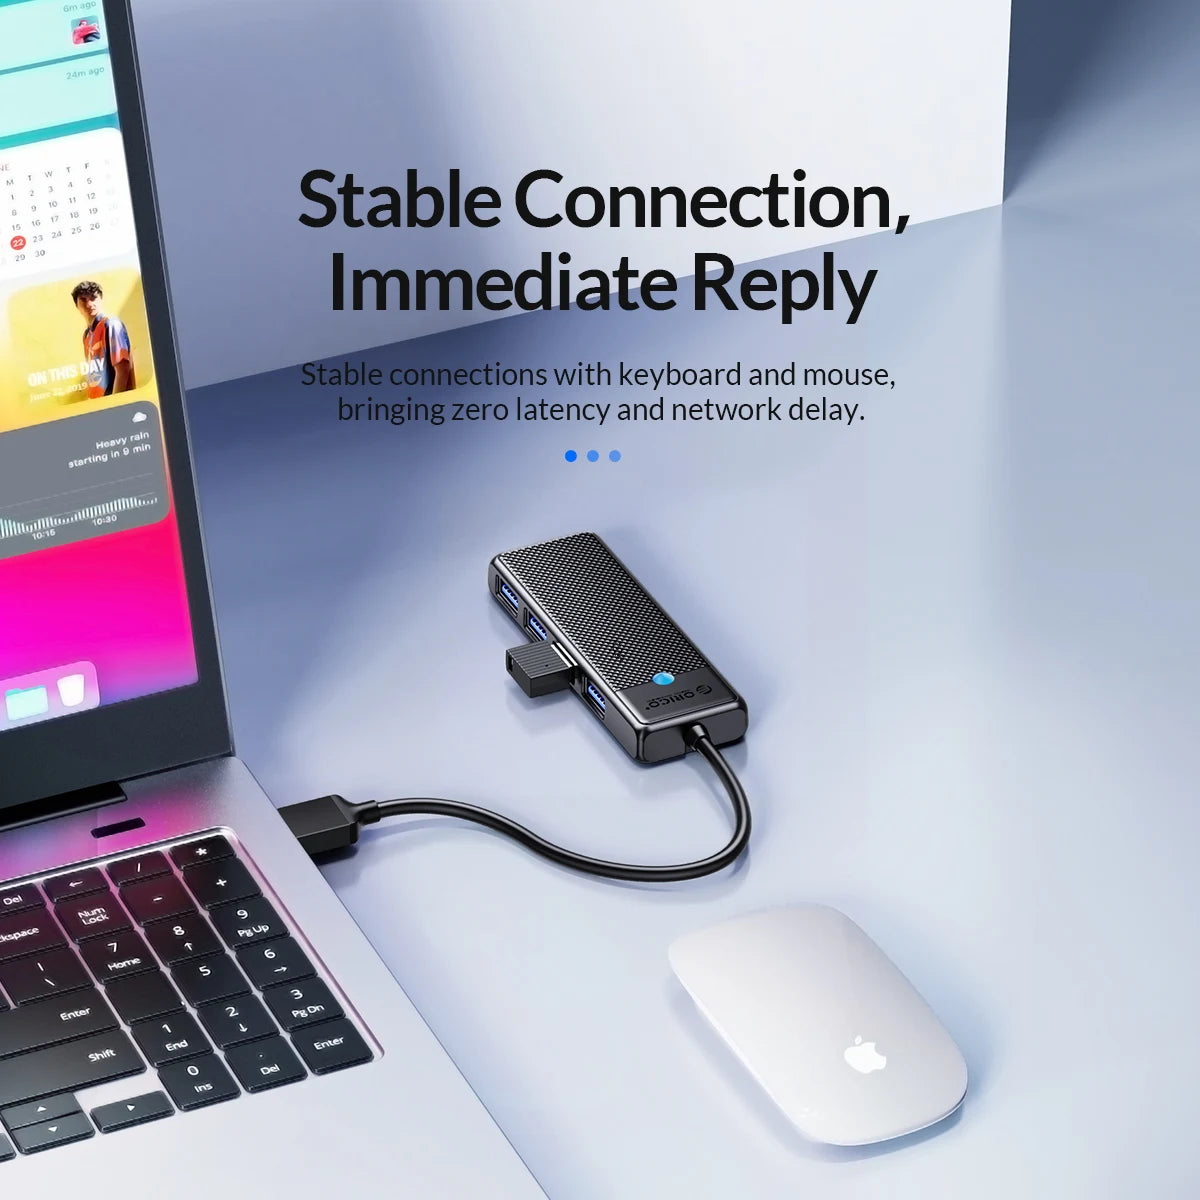 Cloud Discoveries Ultra-Slim Type C USB Hub 3.0 - 4-Port Splitter OTG Adapter for PC Computer Accessories, Enhance Connectivity with Compact Design, Plug and Play Convenience for Keyboards, Mice, and More